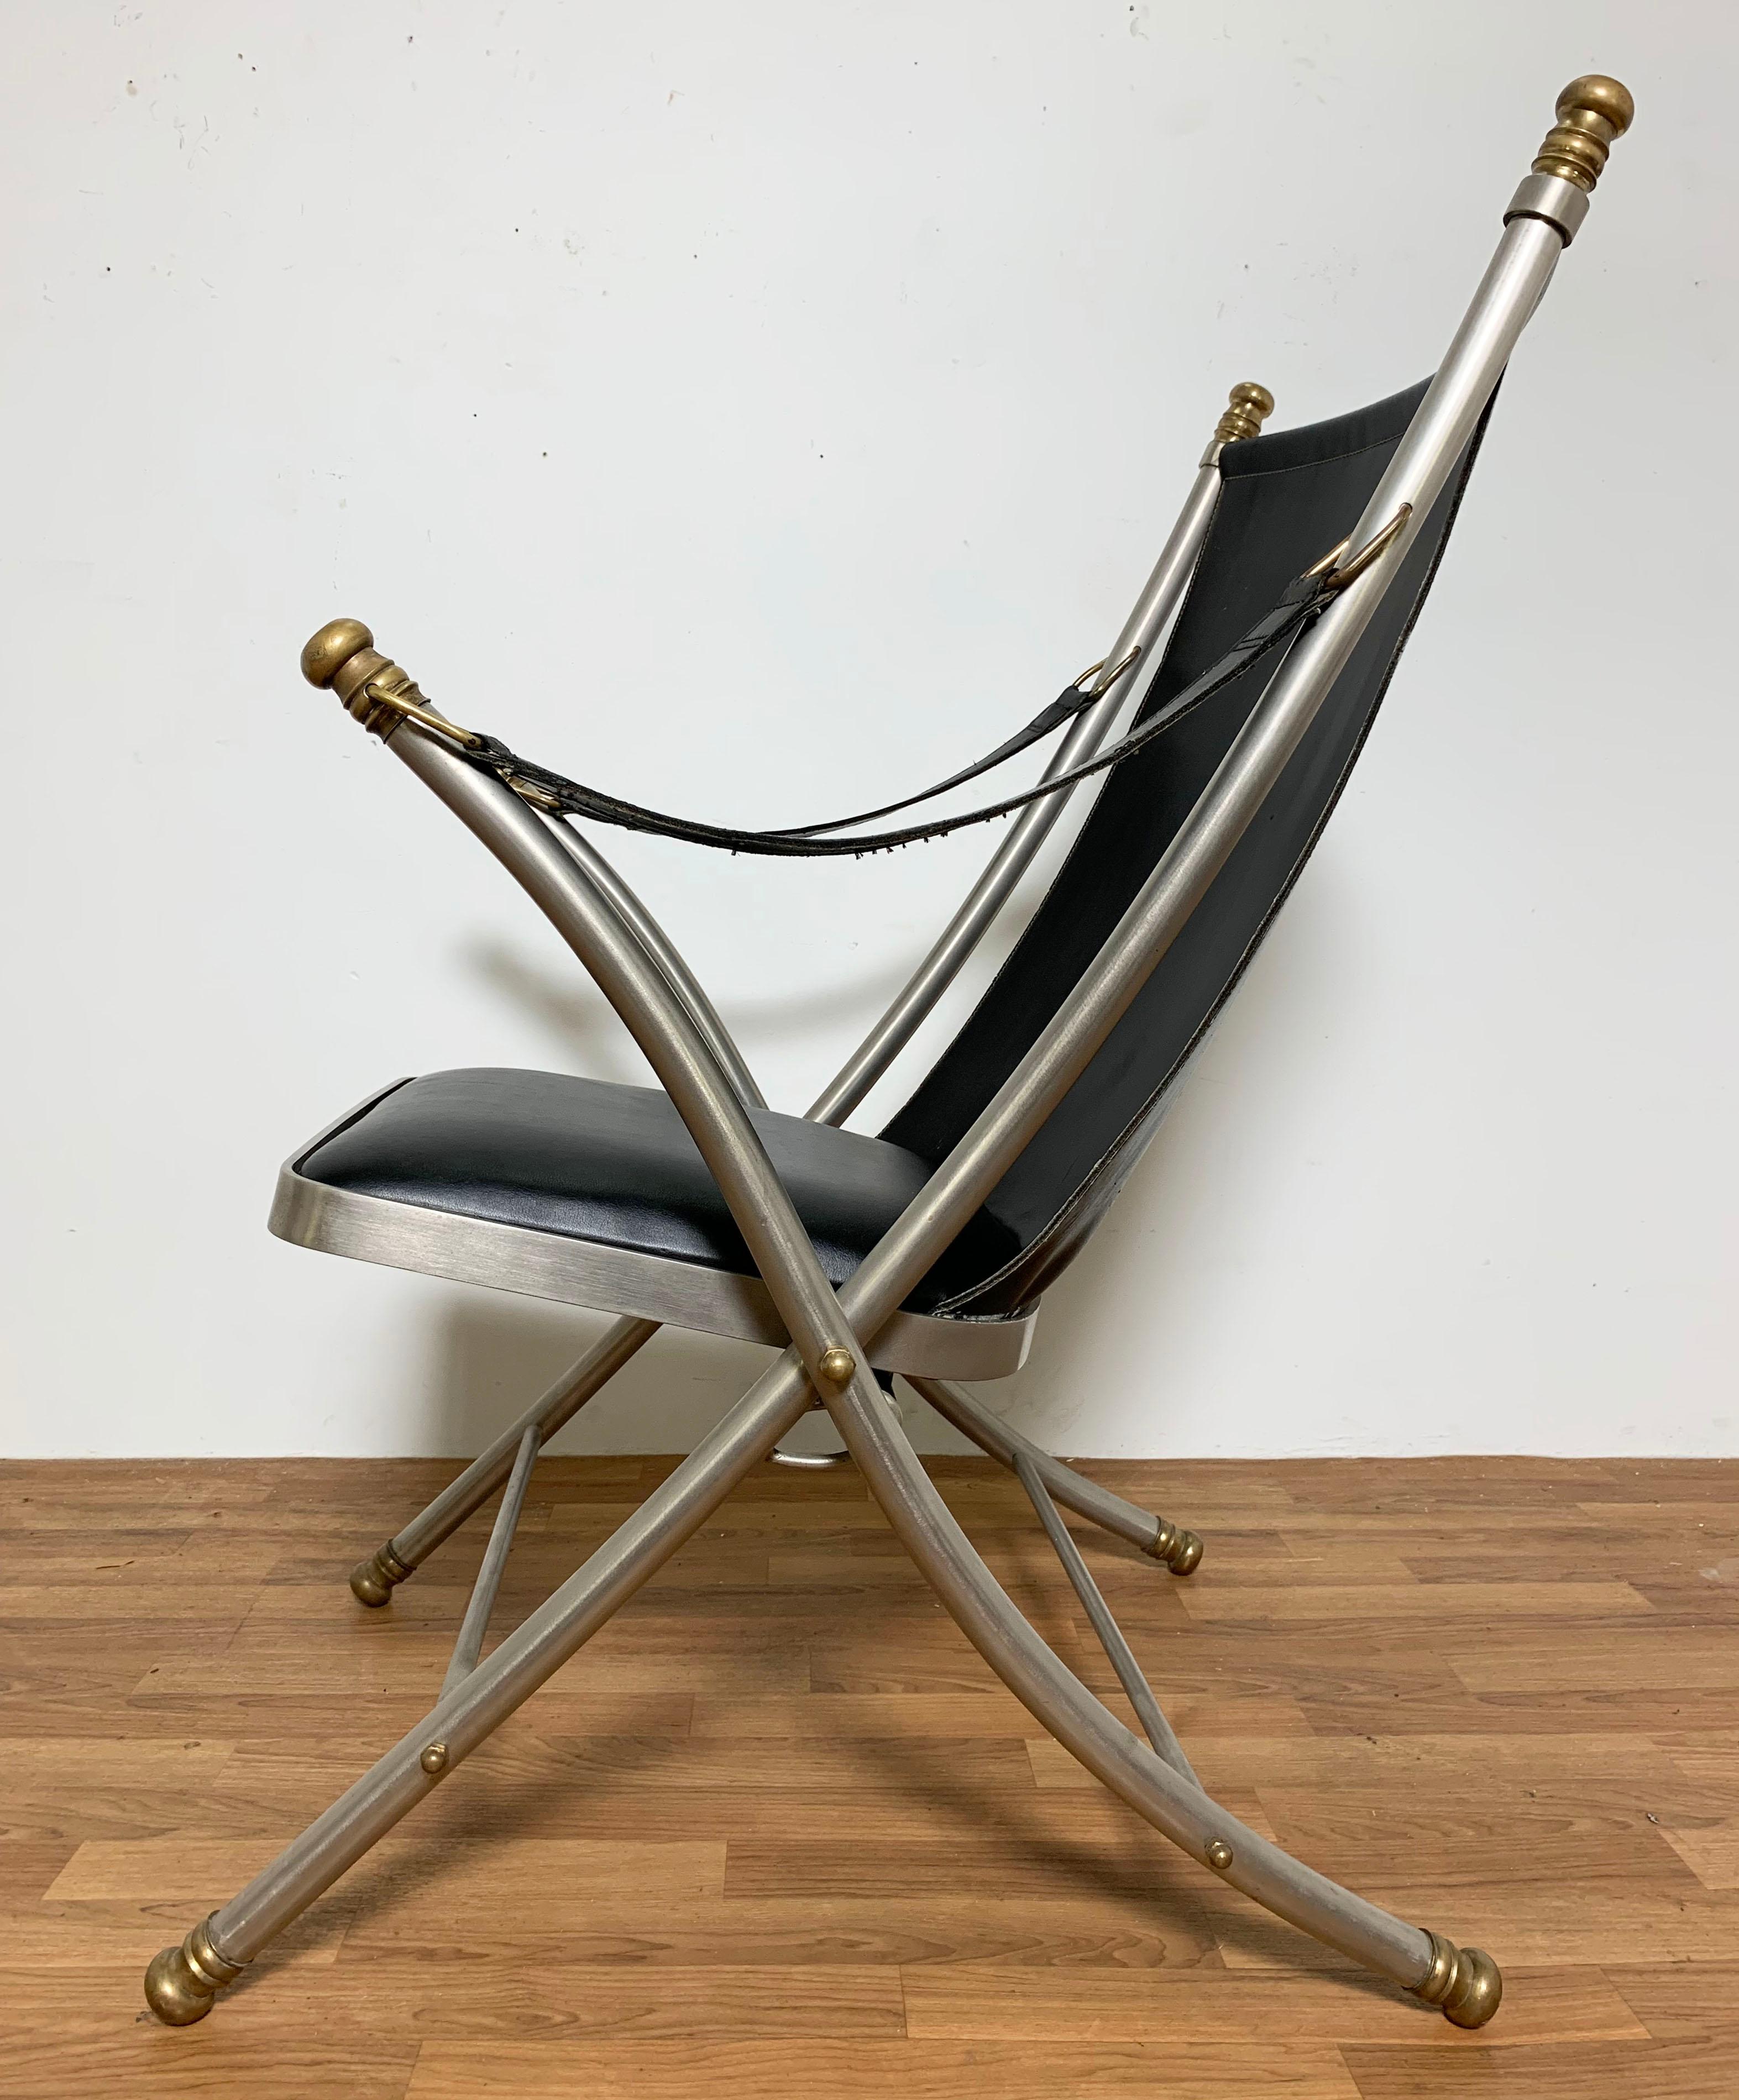 A folding campaign chair in mixed metals with leather upholstery in the style of Maison Jansen, circa 1960s.